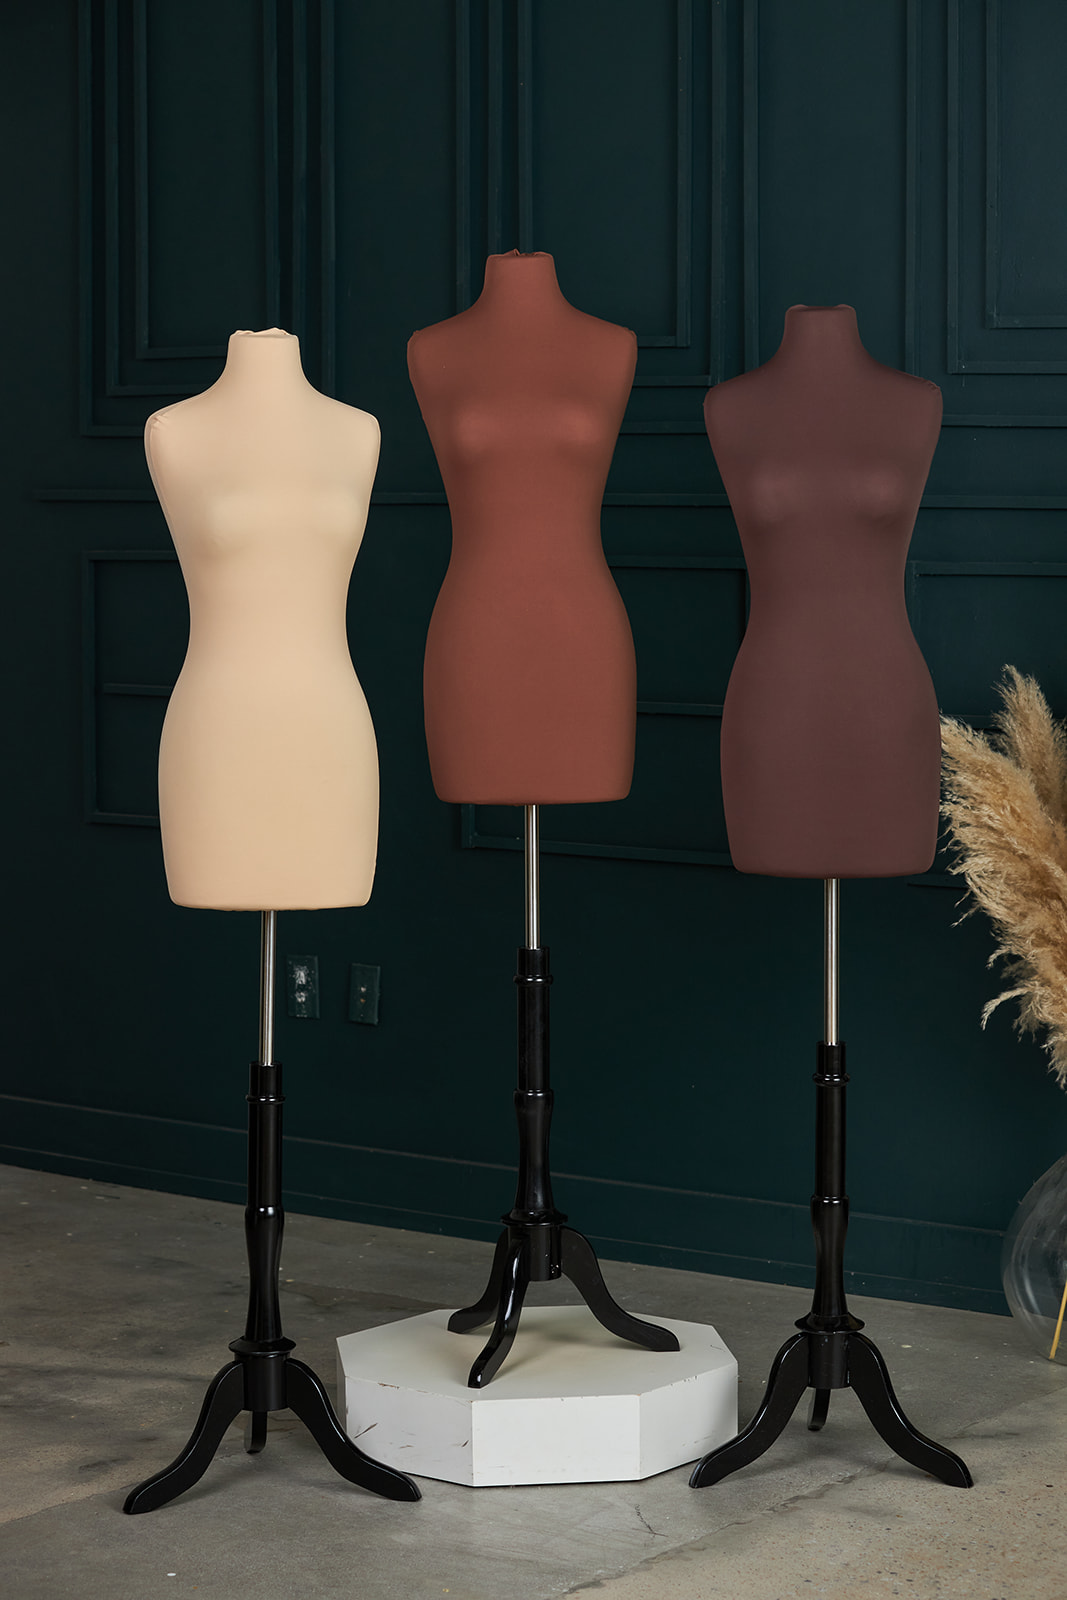 HUES Mannequin Covers – All Sales Final - Bridal Provisions, a